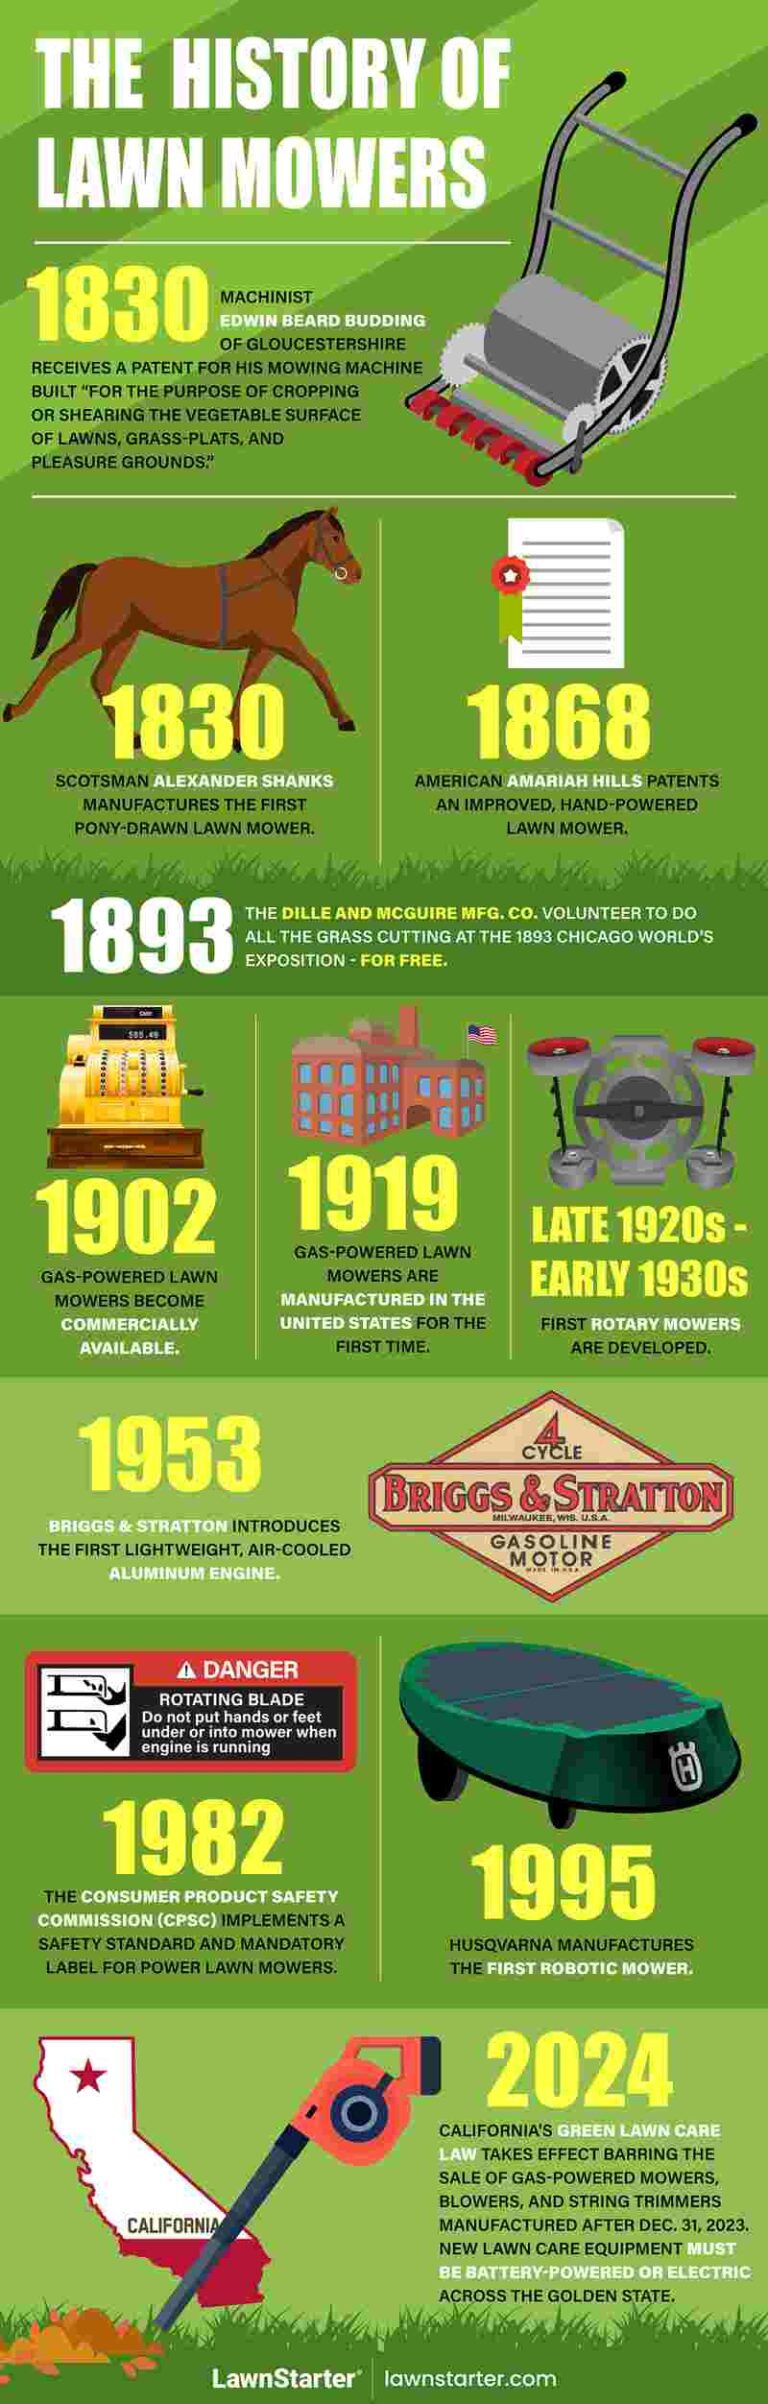 The History of Lawn Mowers - Overdrive Vending and Lawn Care